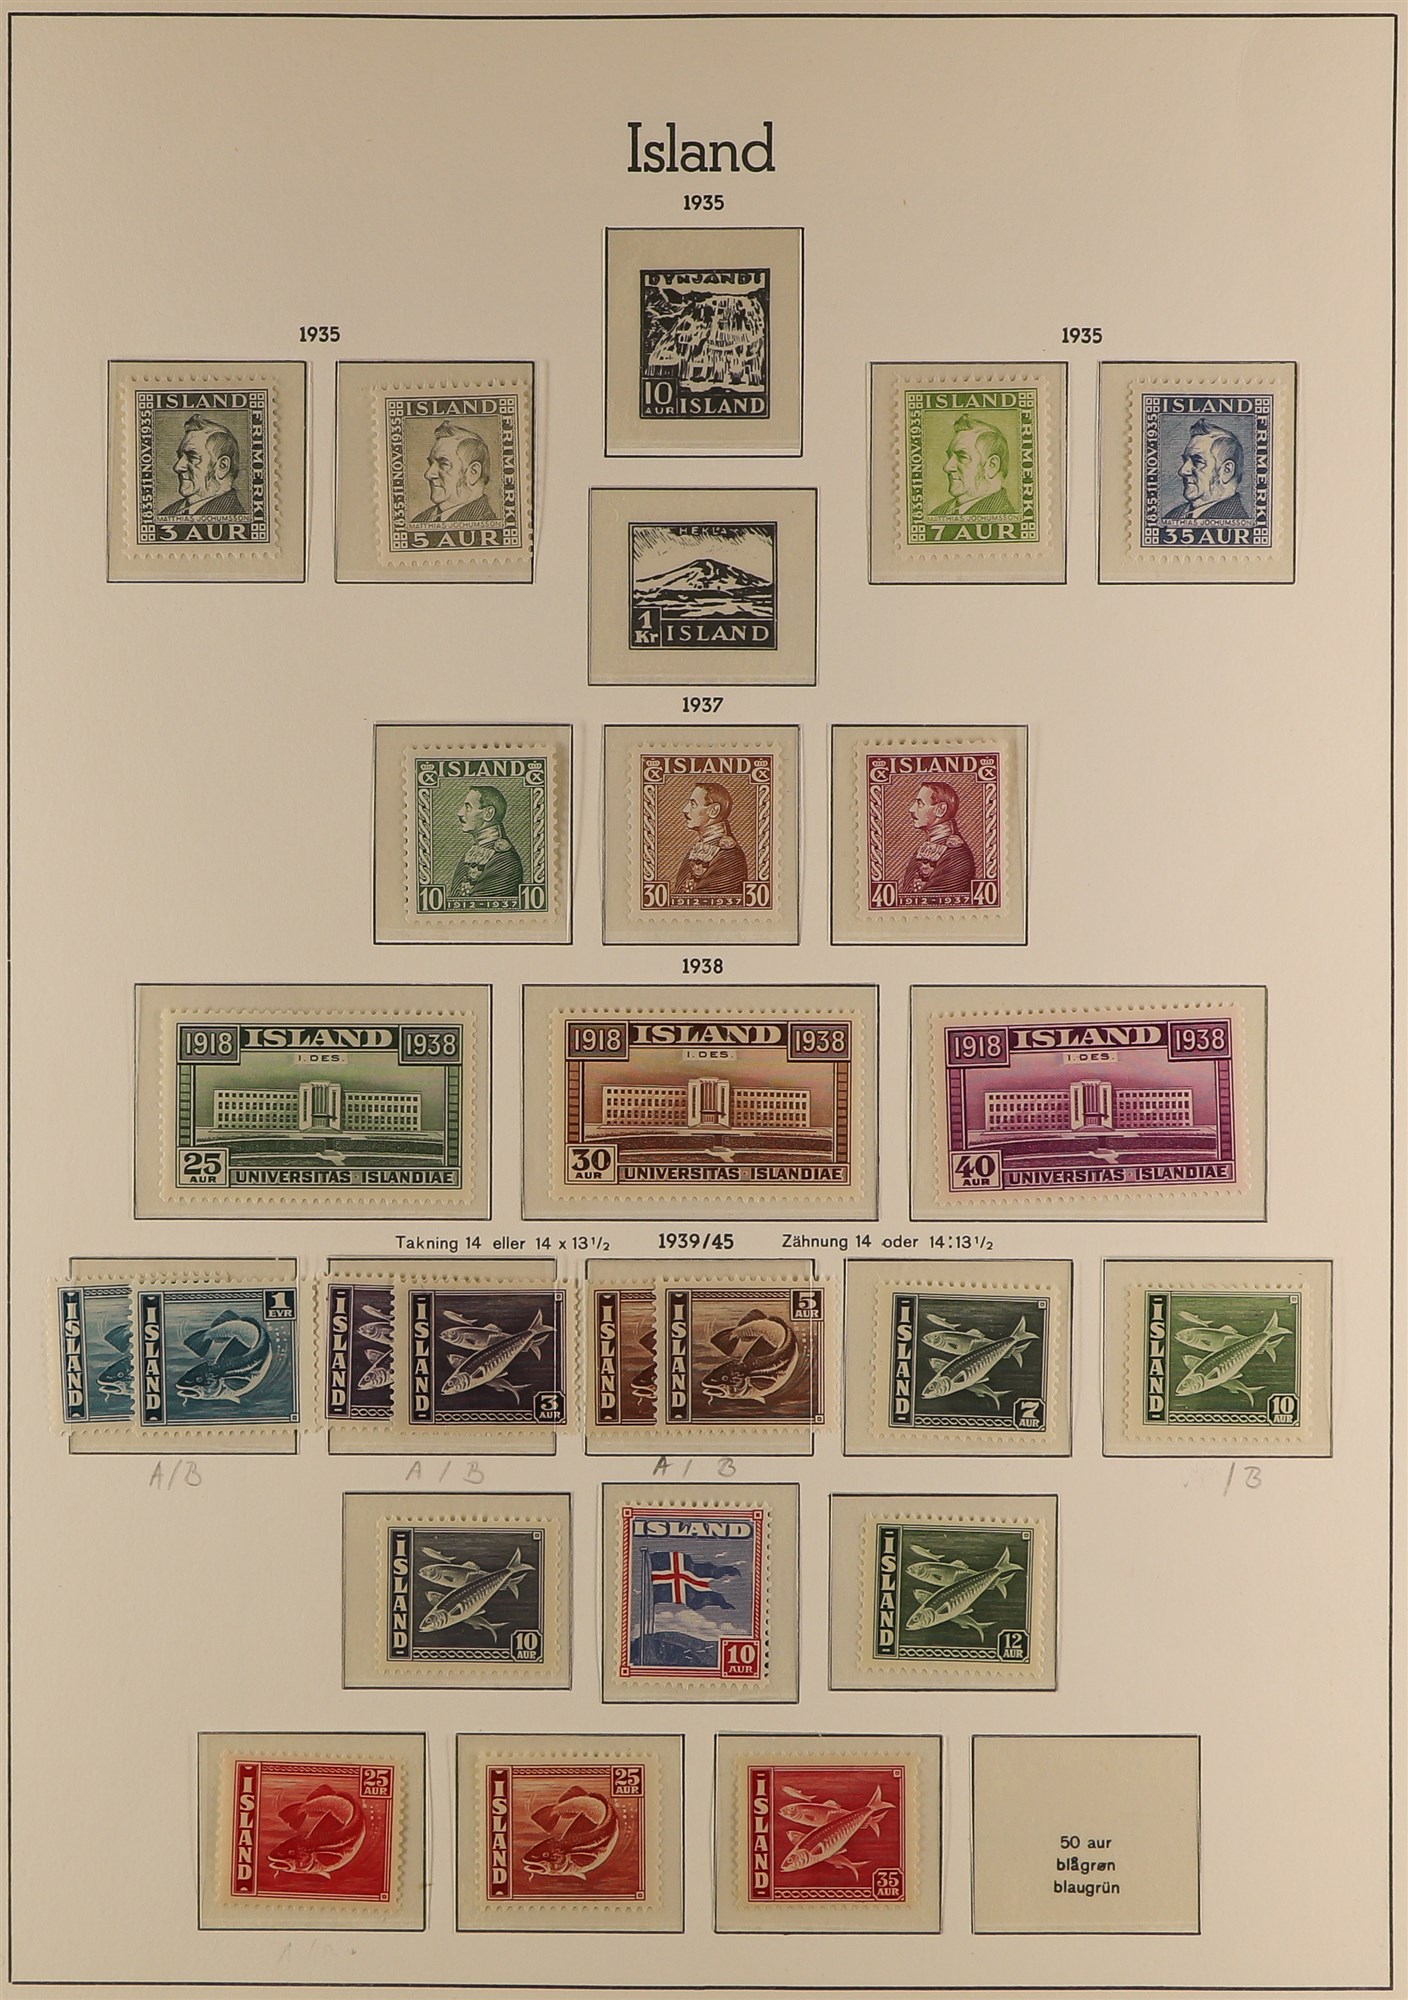 ICELAND 1918 - 1939 MINT / NEVER HINGED MINT COLLECTION. on hingeless Iceland album pages, many sets - Image 5 of 8